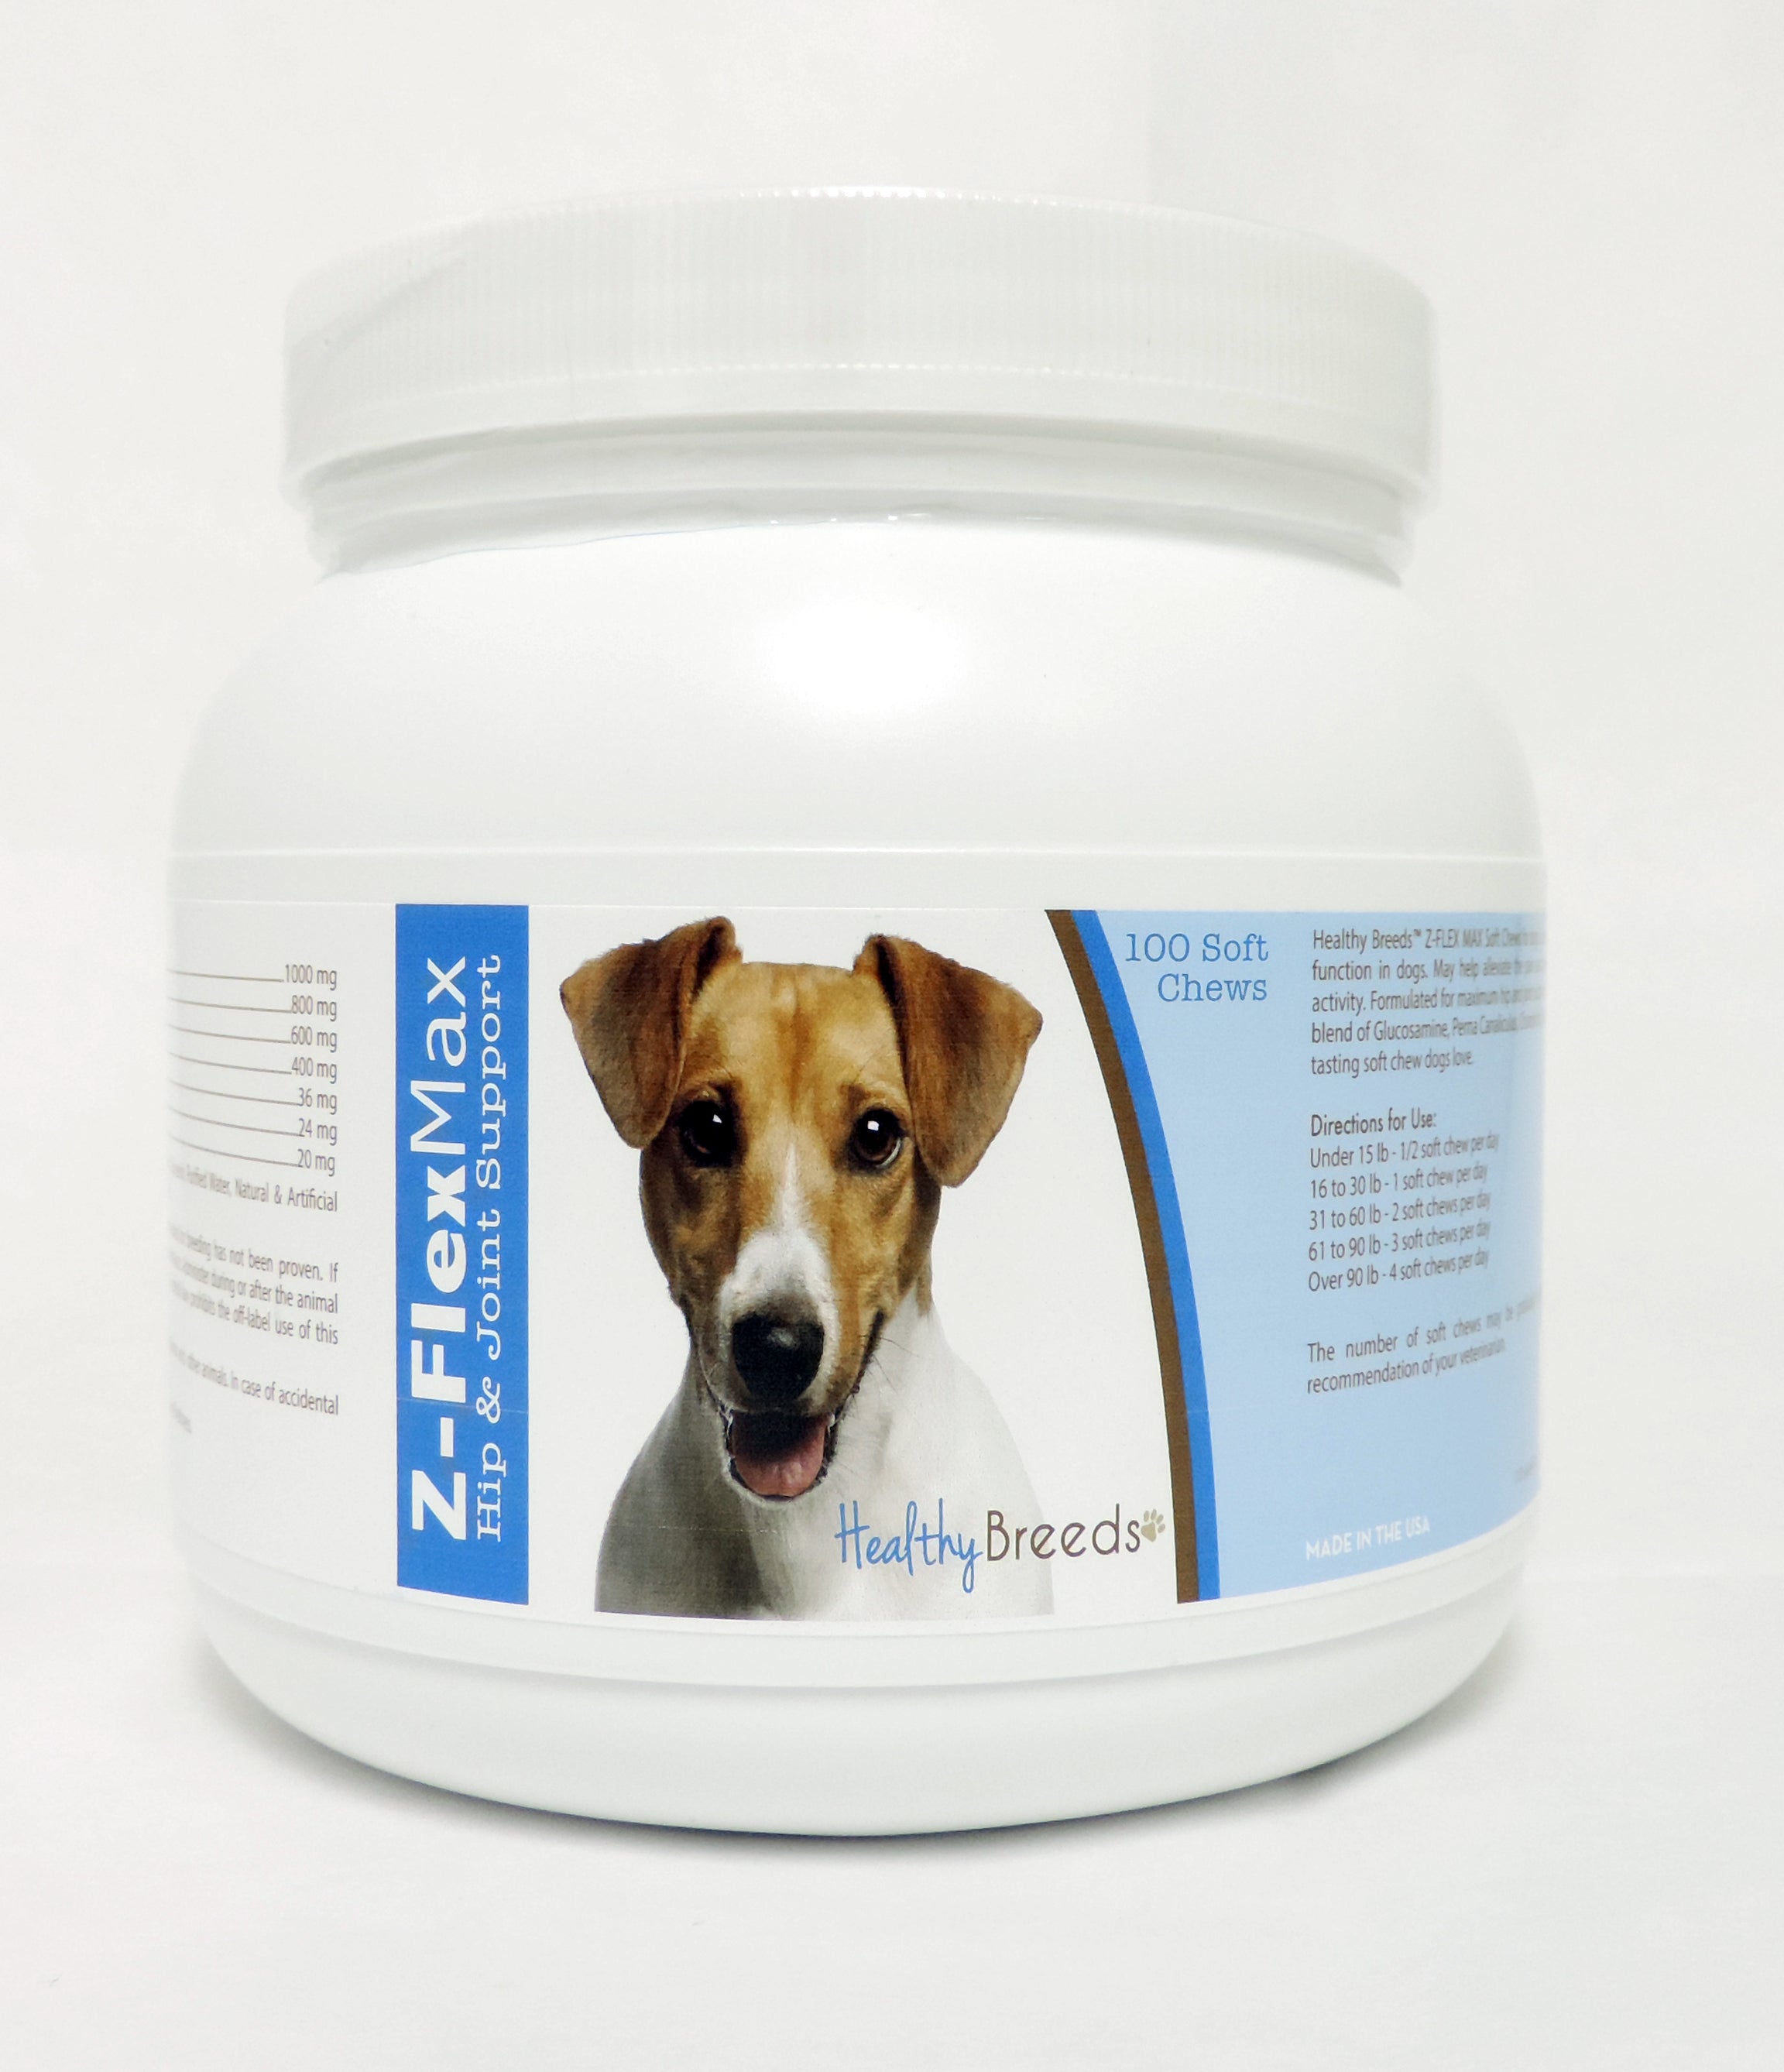 Jack Russell Terrier Z-Flex Max Hip & Joint Soft Chews 100 Count